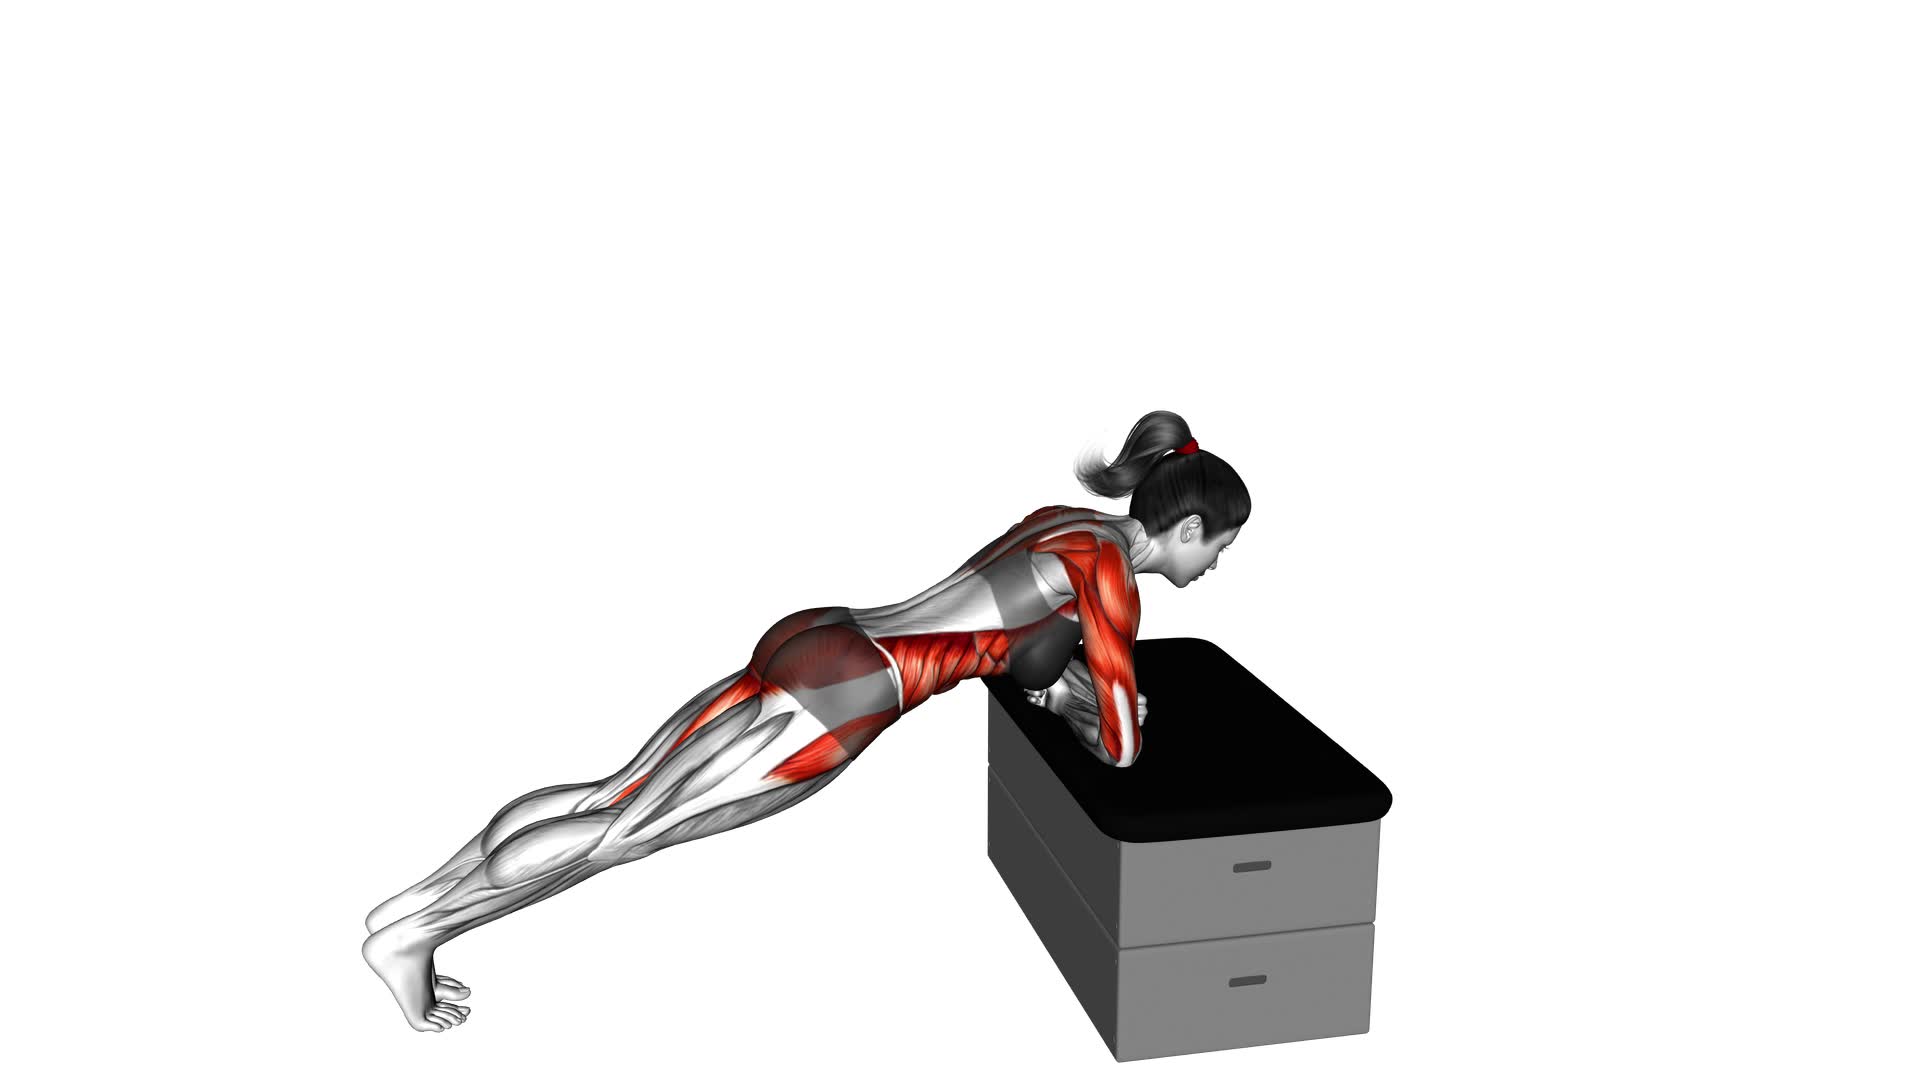 Side Plank Rotation a Padded Stool Supported (Female) - Video Exercise Guide & Tips